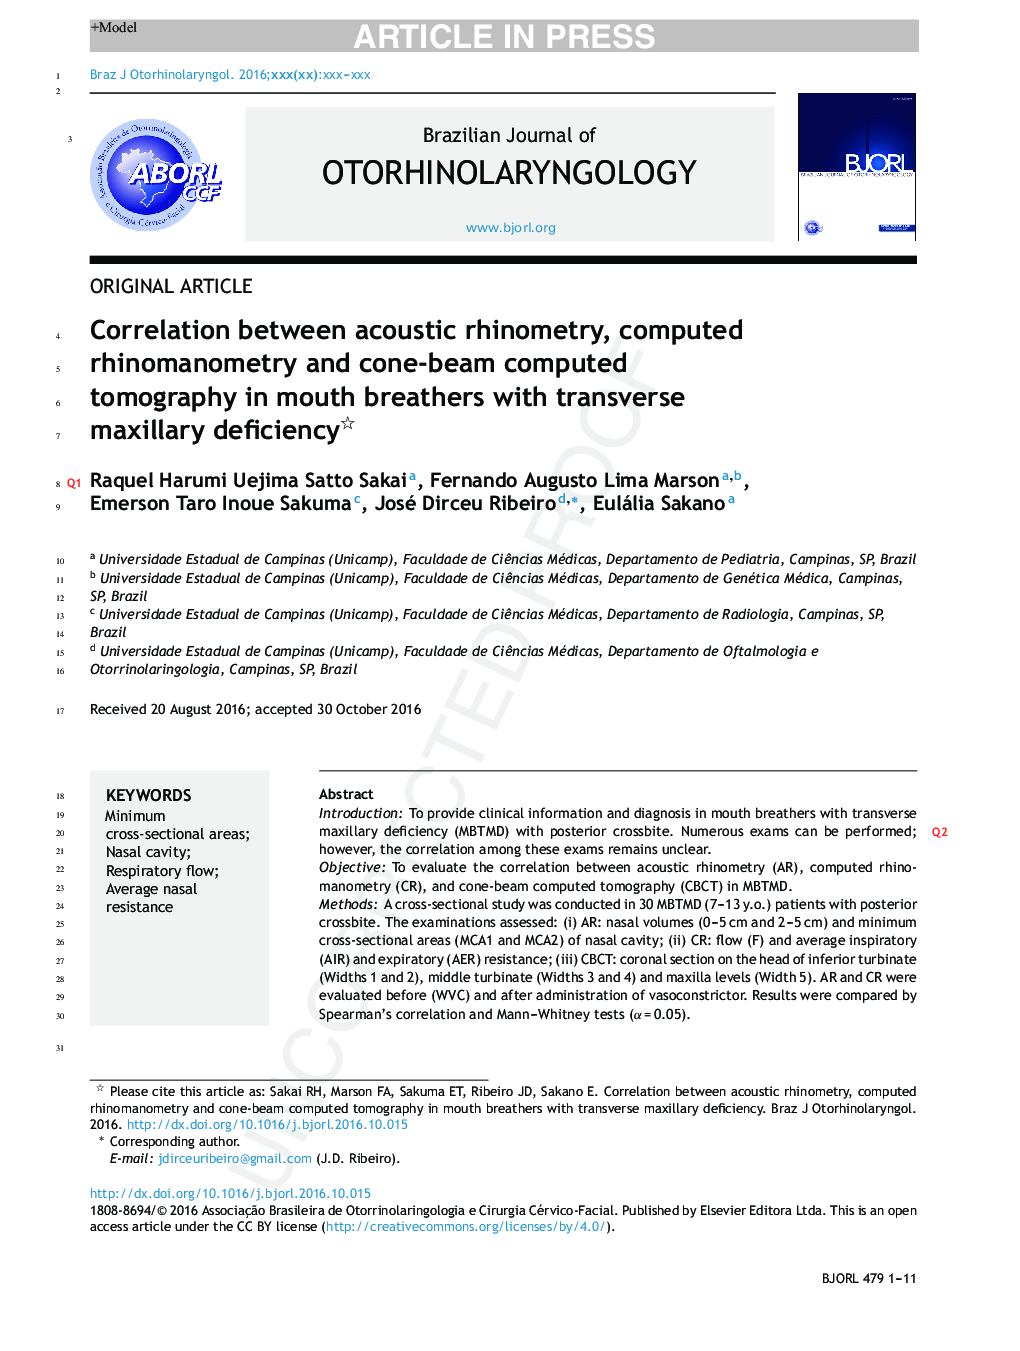 Correlation between acoustic rhinometry, computed rhinomanometry and cone-beam computed tomography in mouth breathers with transverse maxillary deficiency